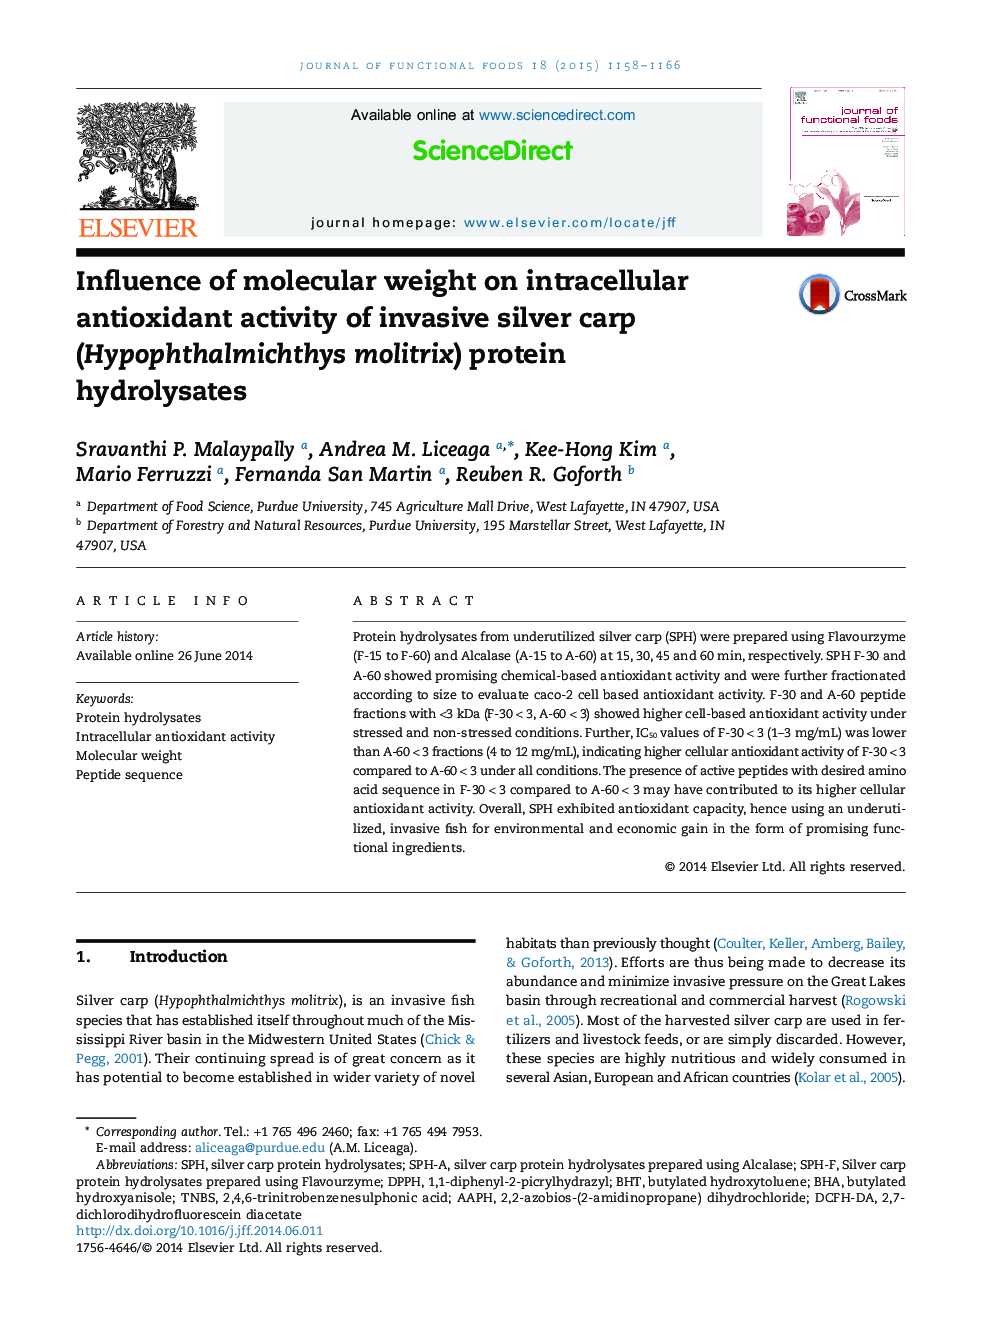 Influence of molecular weight on intracellular antioxidant activity of invasive silver carp (Hypophthalmichthys molitrix) protein hydrolysates